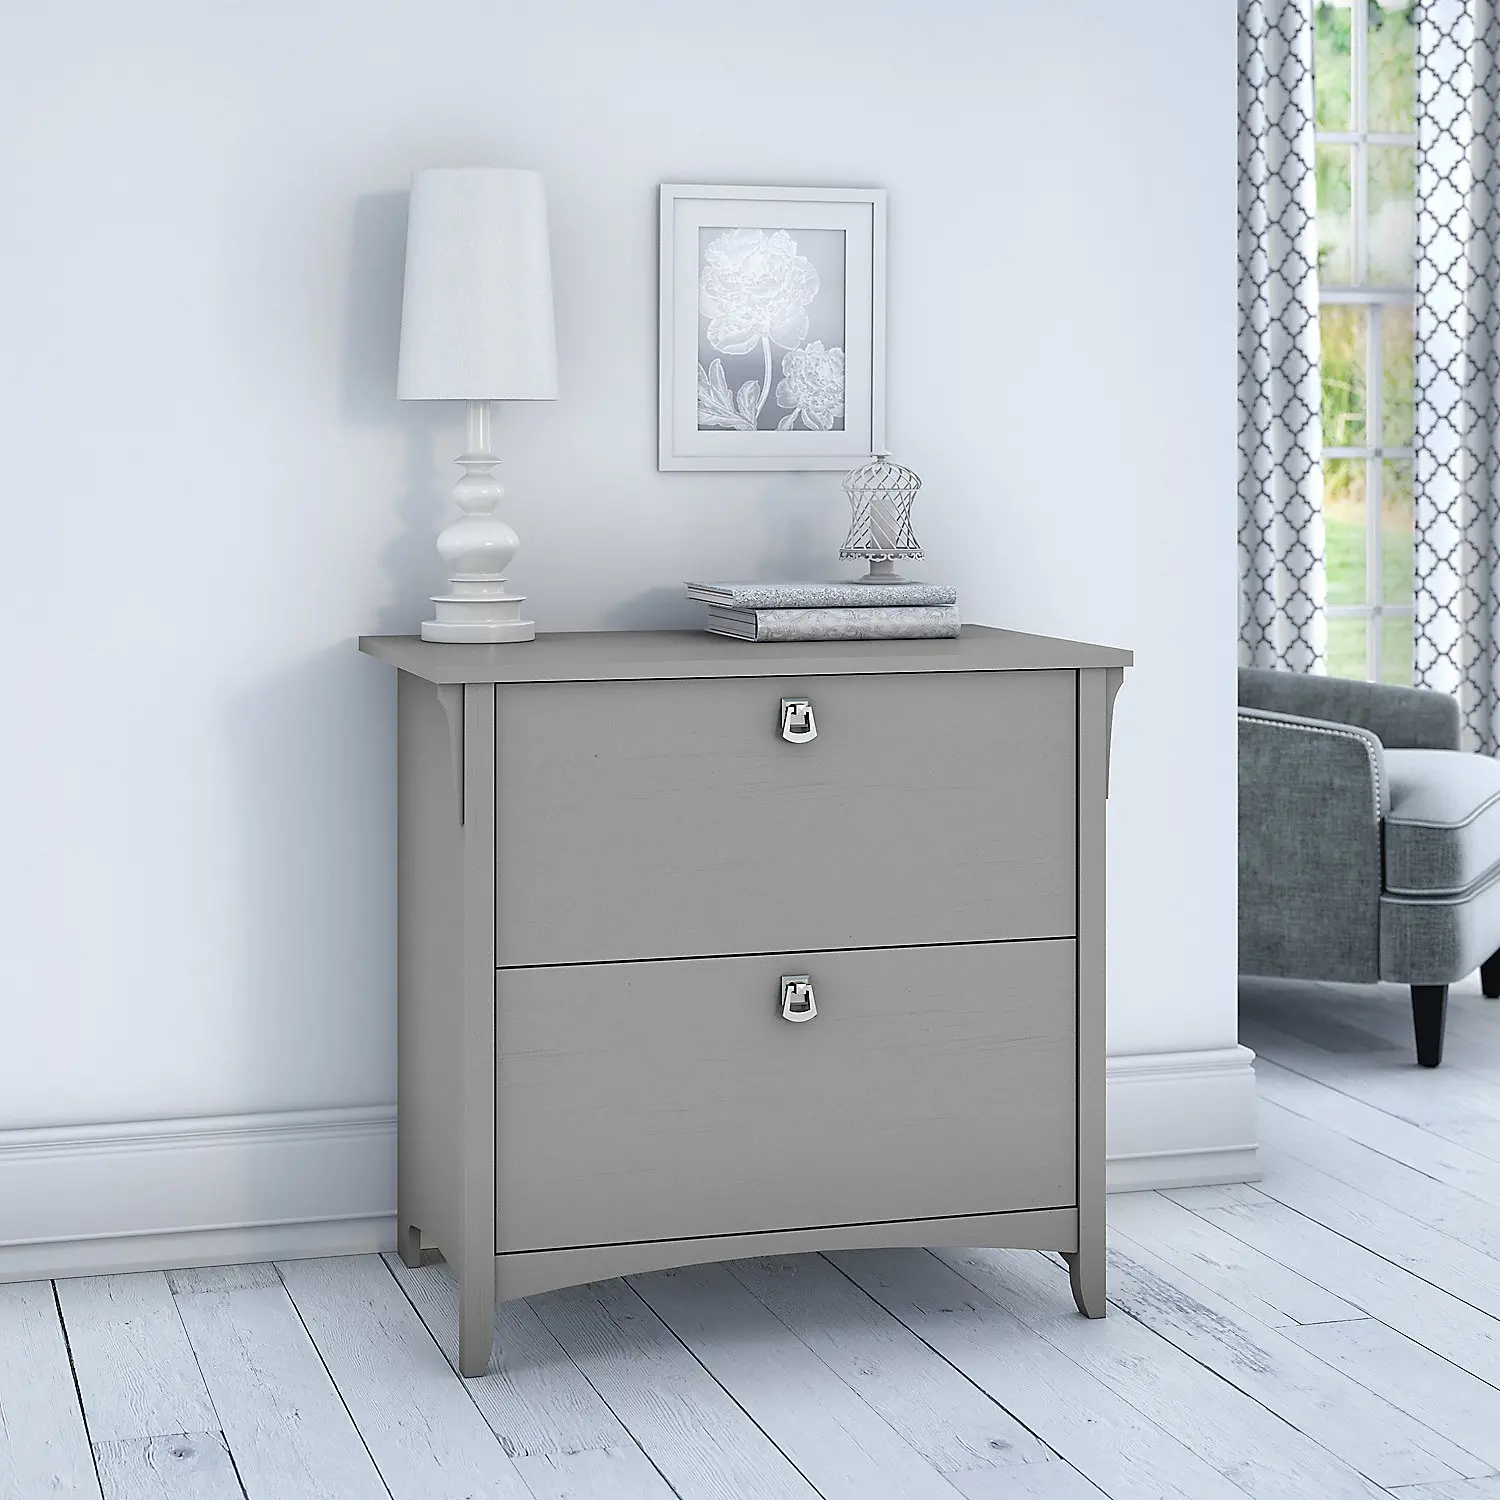 https://static.rcwilley.com/products/111472740/Salinas-Cape-Cod-Gray-Lateral-File-Cabinet---Bush-Furniture-rcwilley-image1.webp